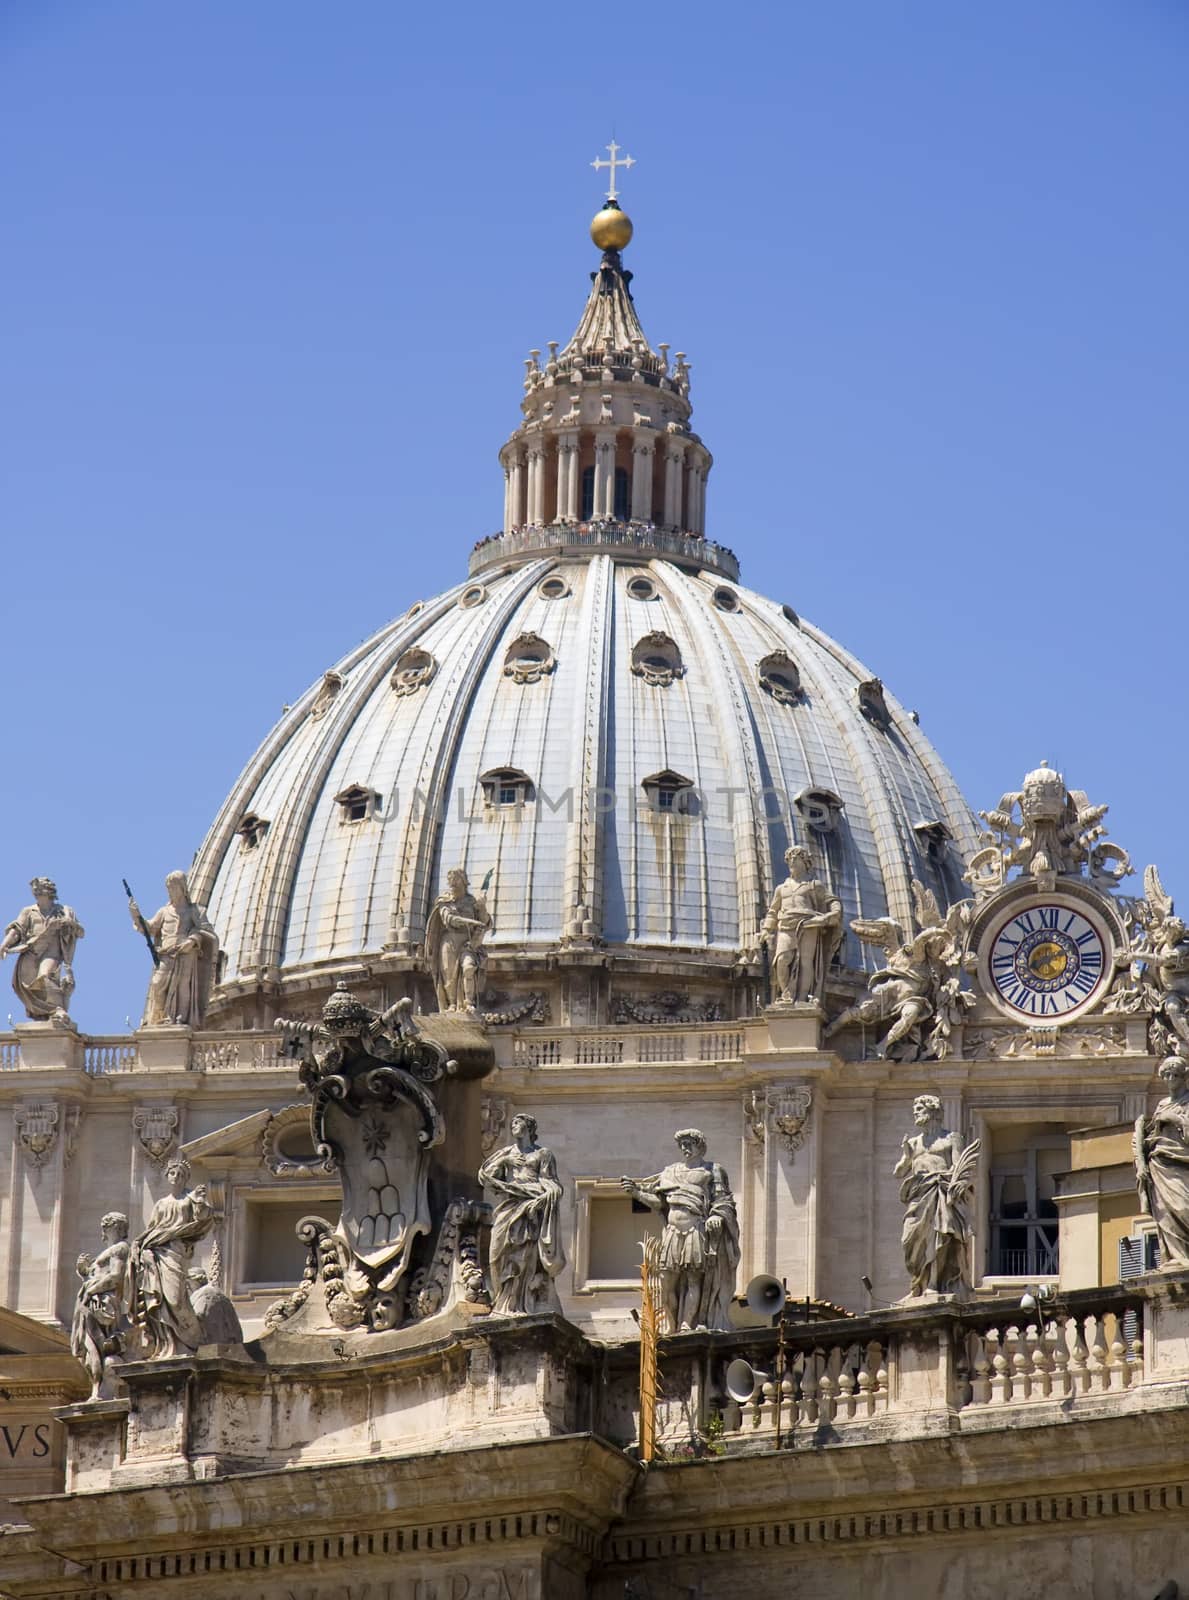 A dome of the St. Petr's Basilica in Vatican City by fotoecho